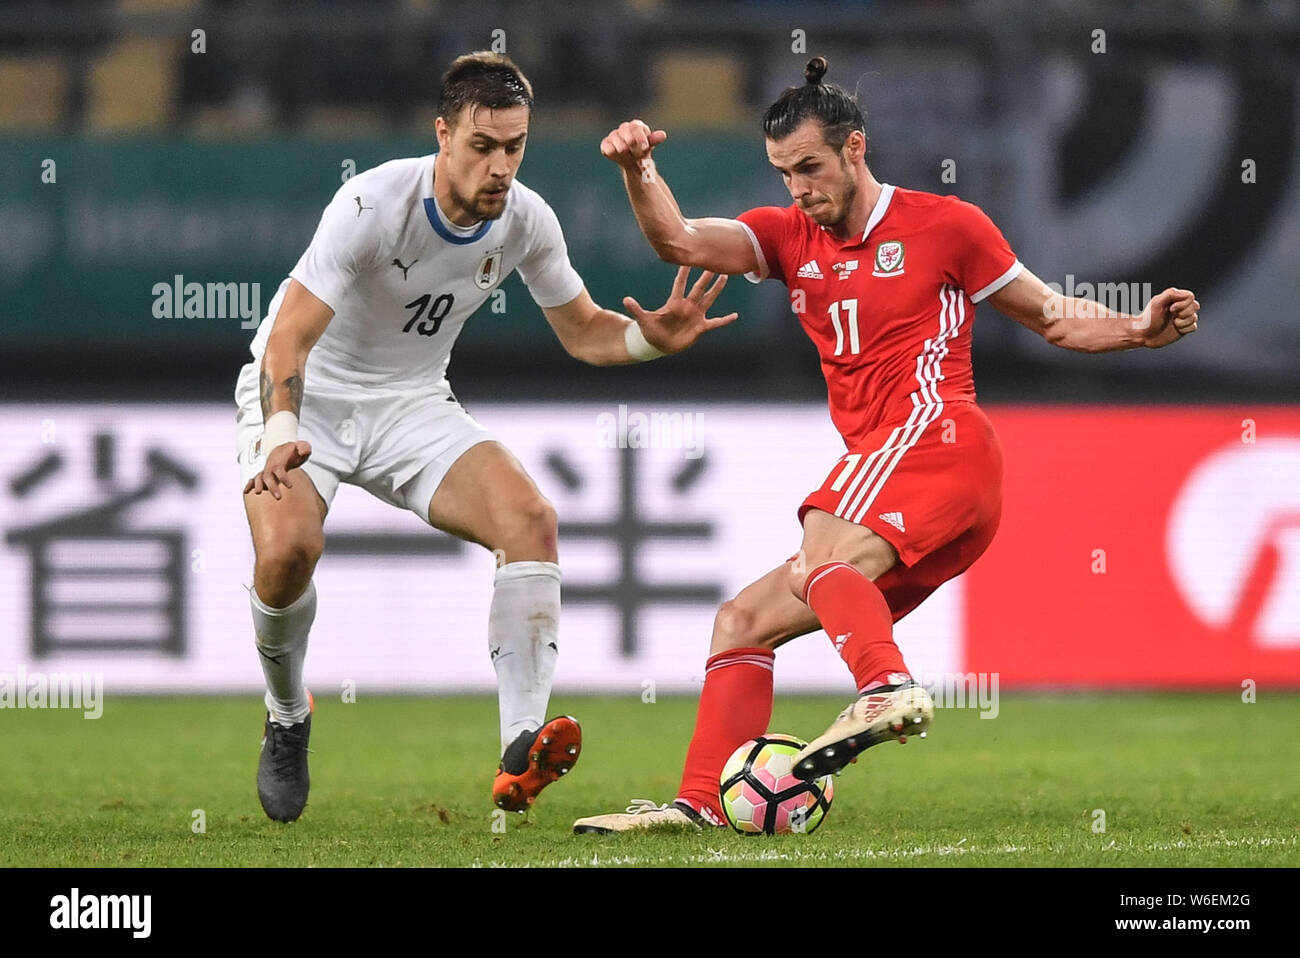 Gareth Bale, right, of Wales national football team kicks the ball to make a pass against Sebastian Coates of Uruguay national football team in their Stock Photo